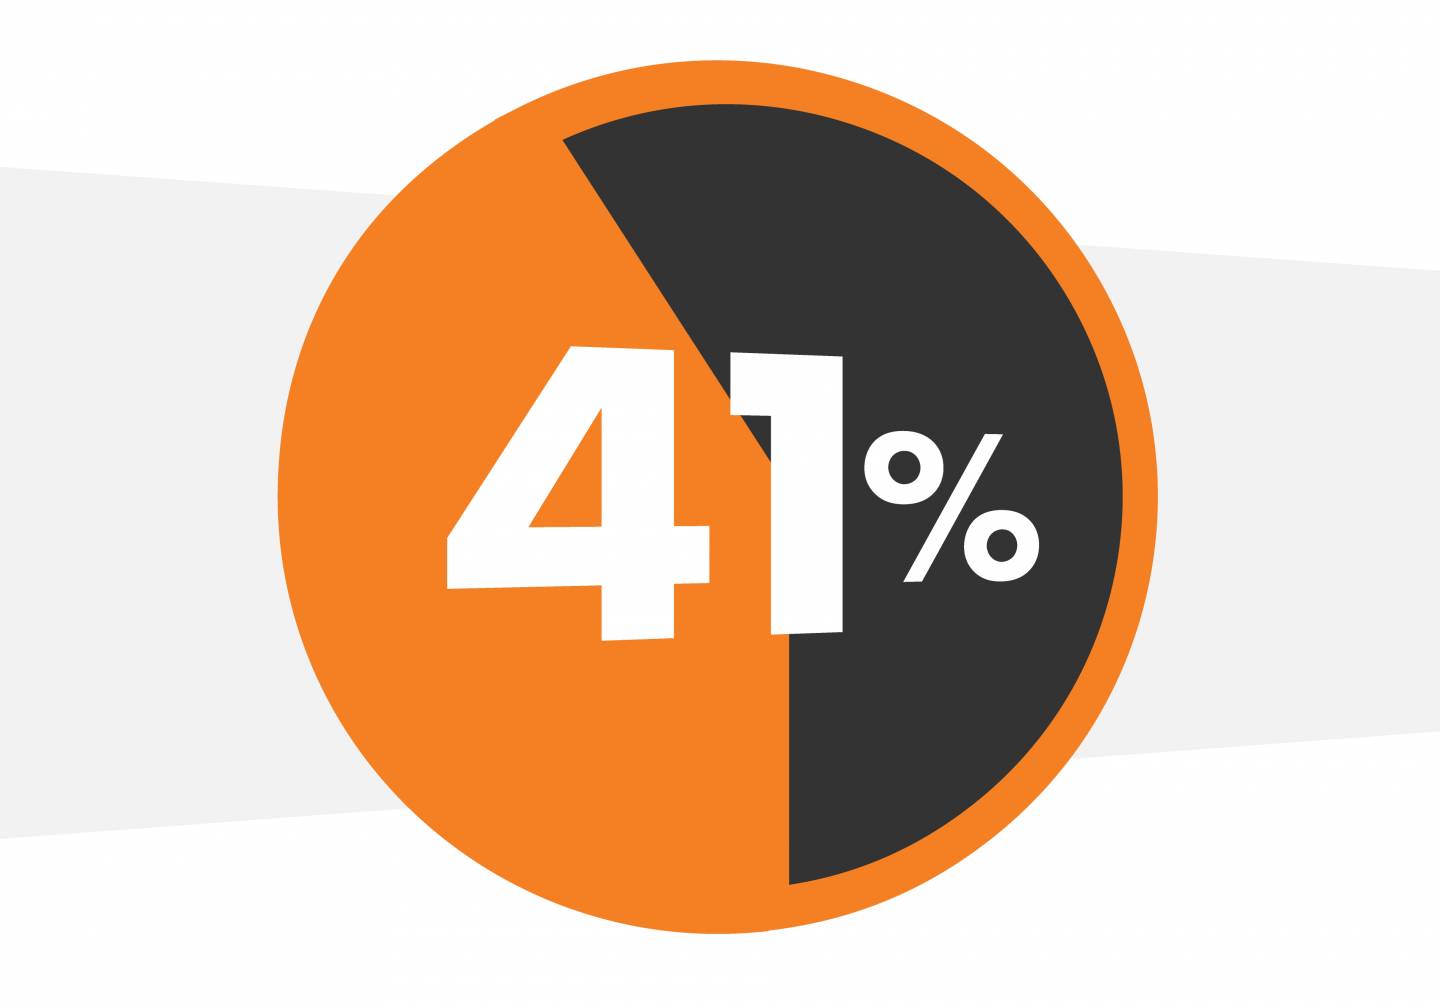 pie chart in orange and black labeled 41%